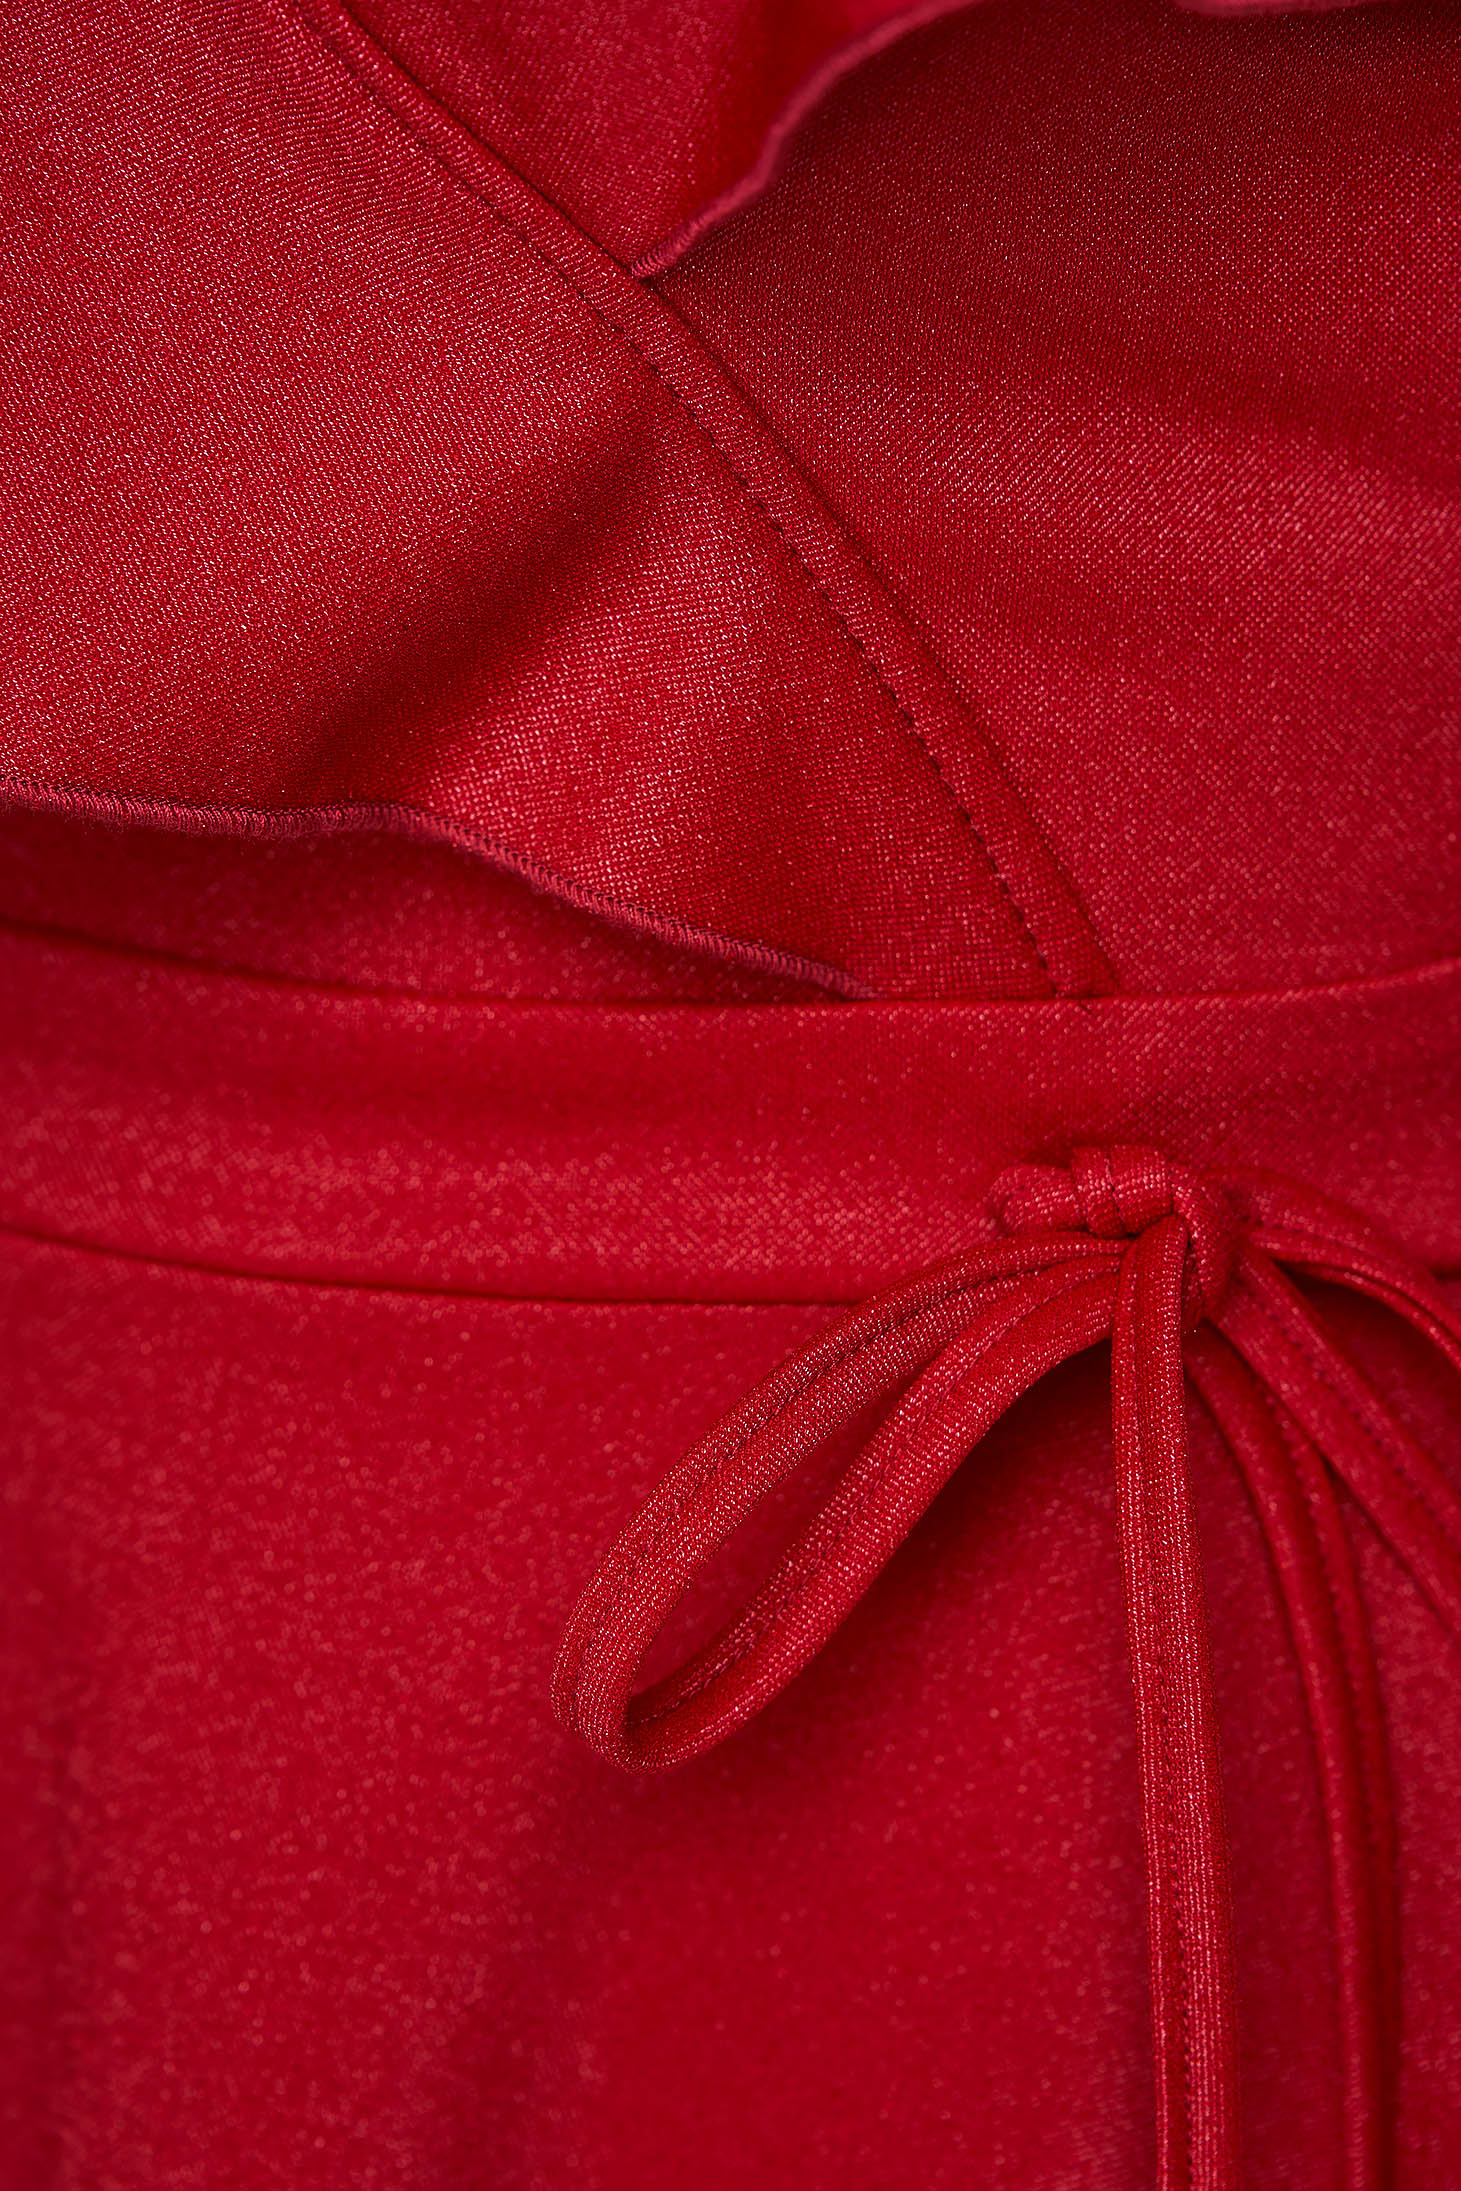 Red crepe dress up to the knee in cloche with glitter applications - StarShinerS 6 - StarShinerS.com